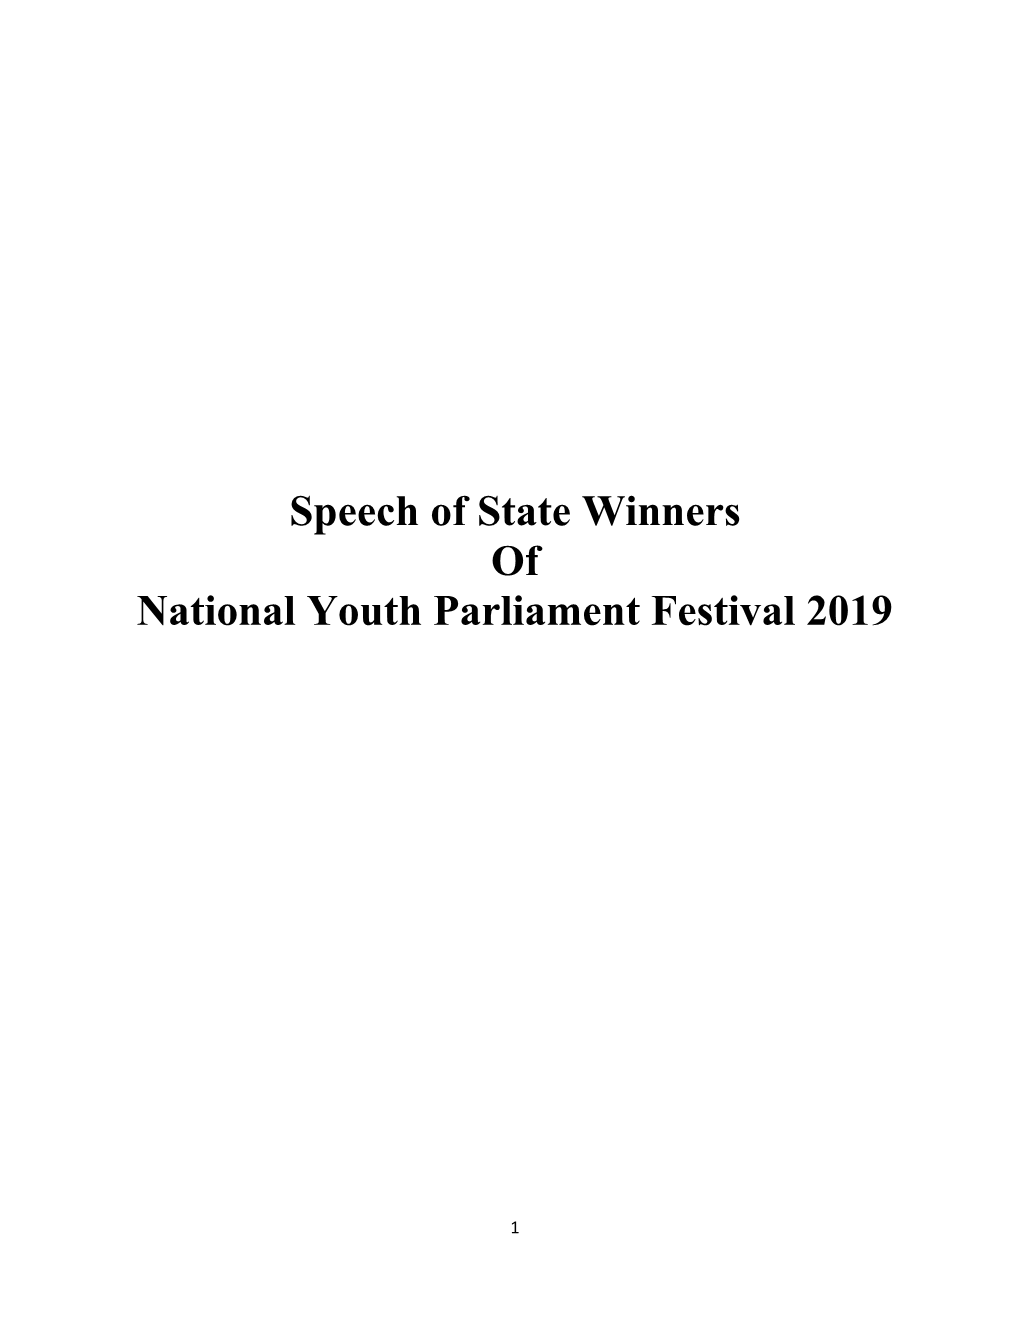 Speech of State Winners of National Youth Parliament Festival 2019